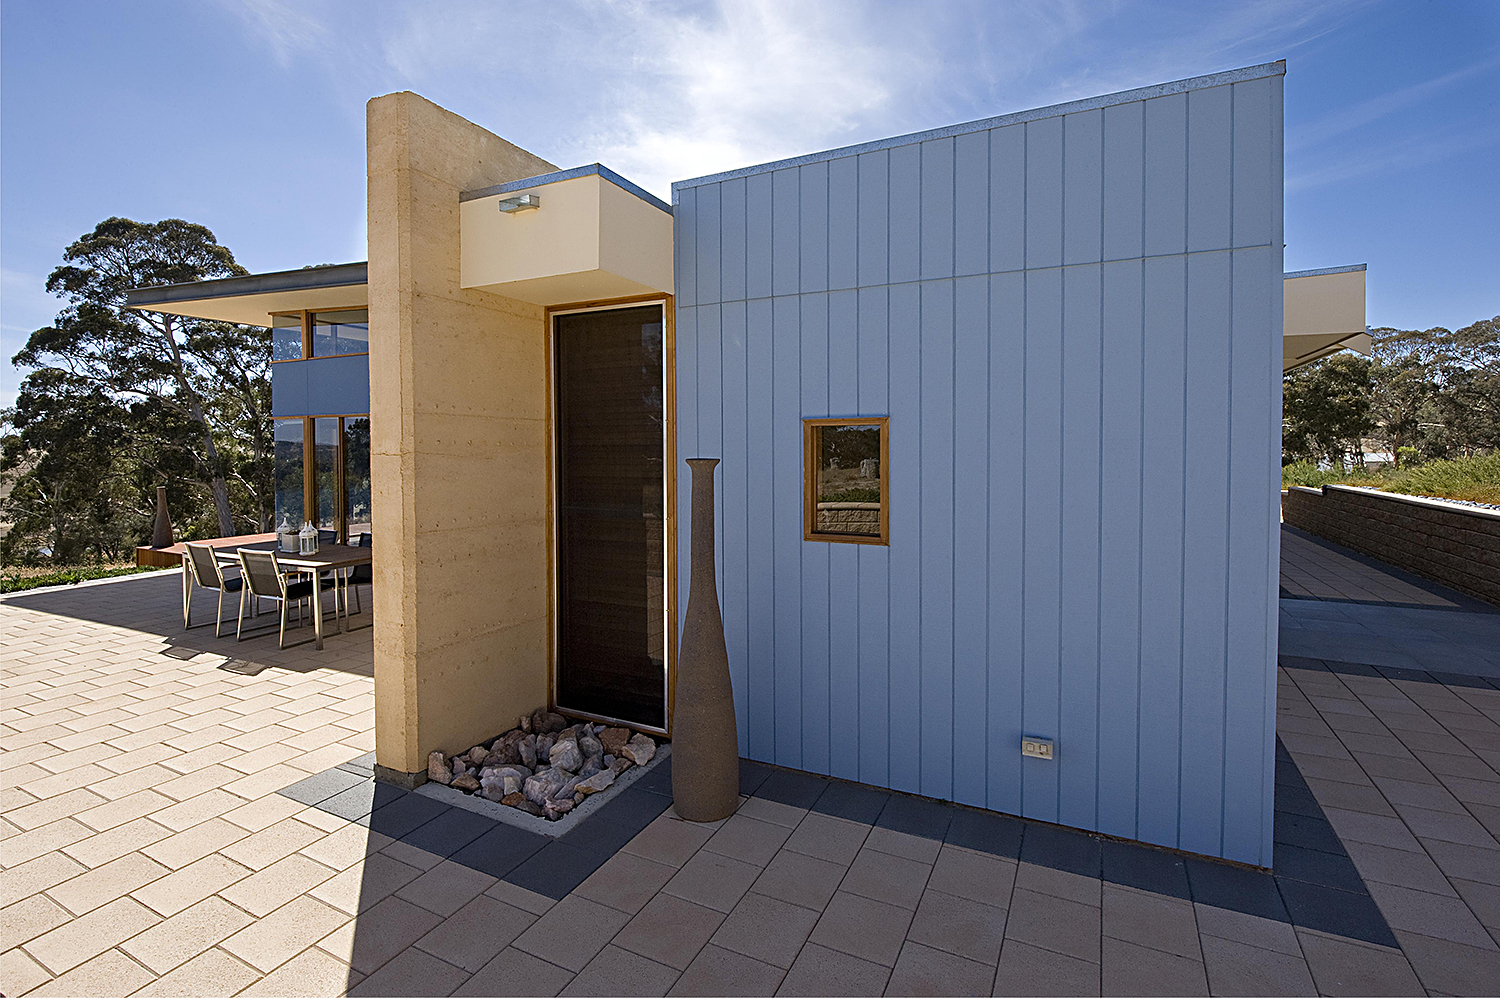 Birdwood Art House - A contemporary architecturally designed home - paved courtyard